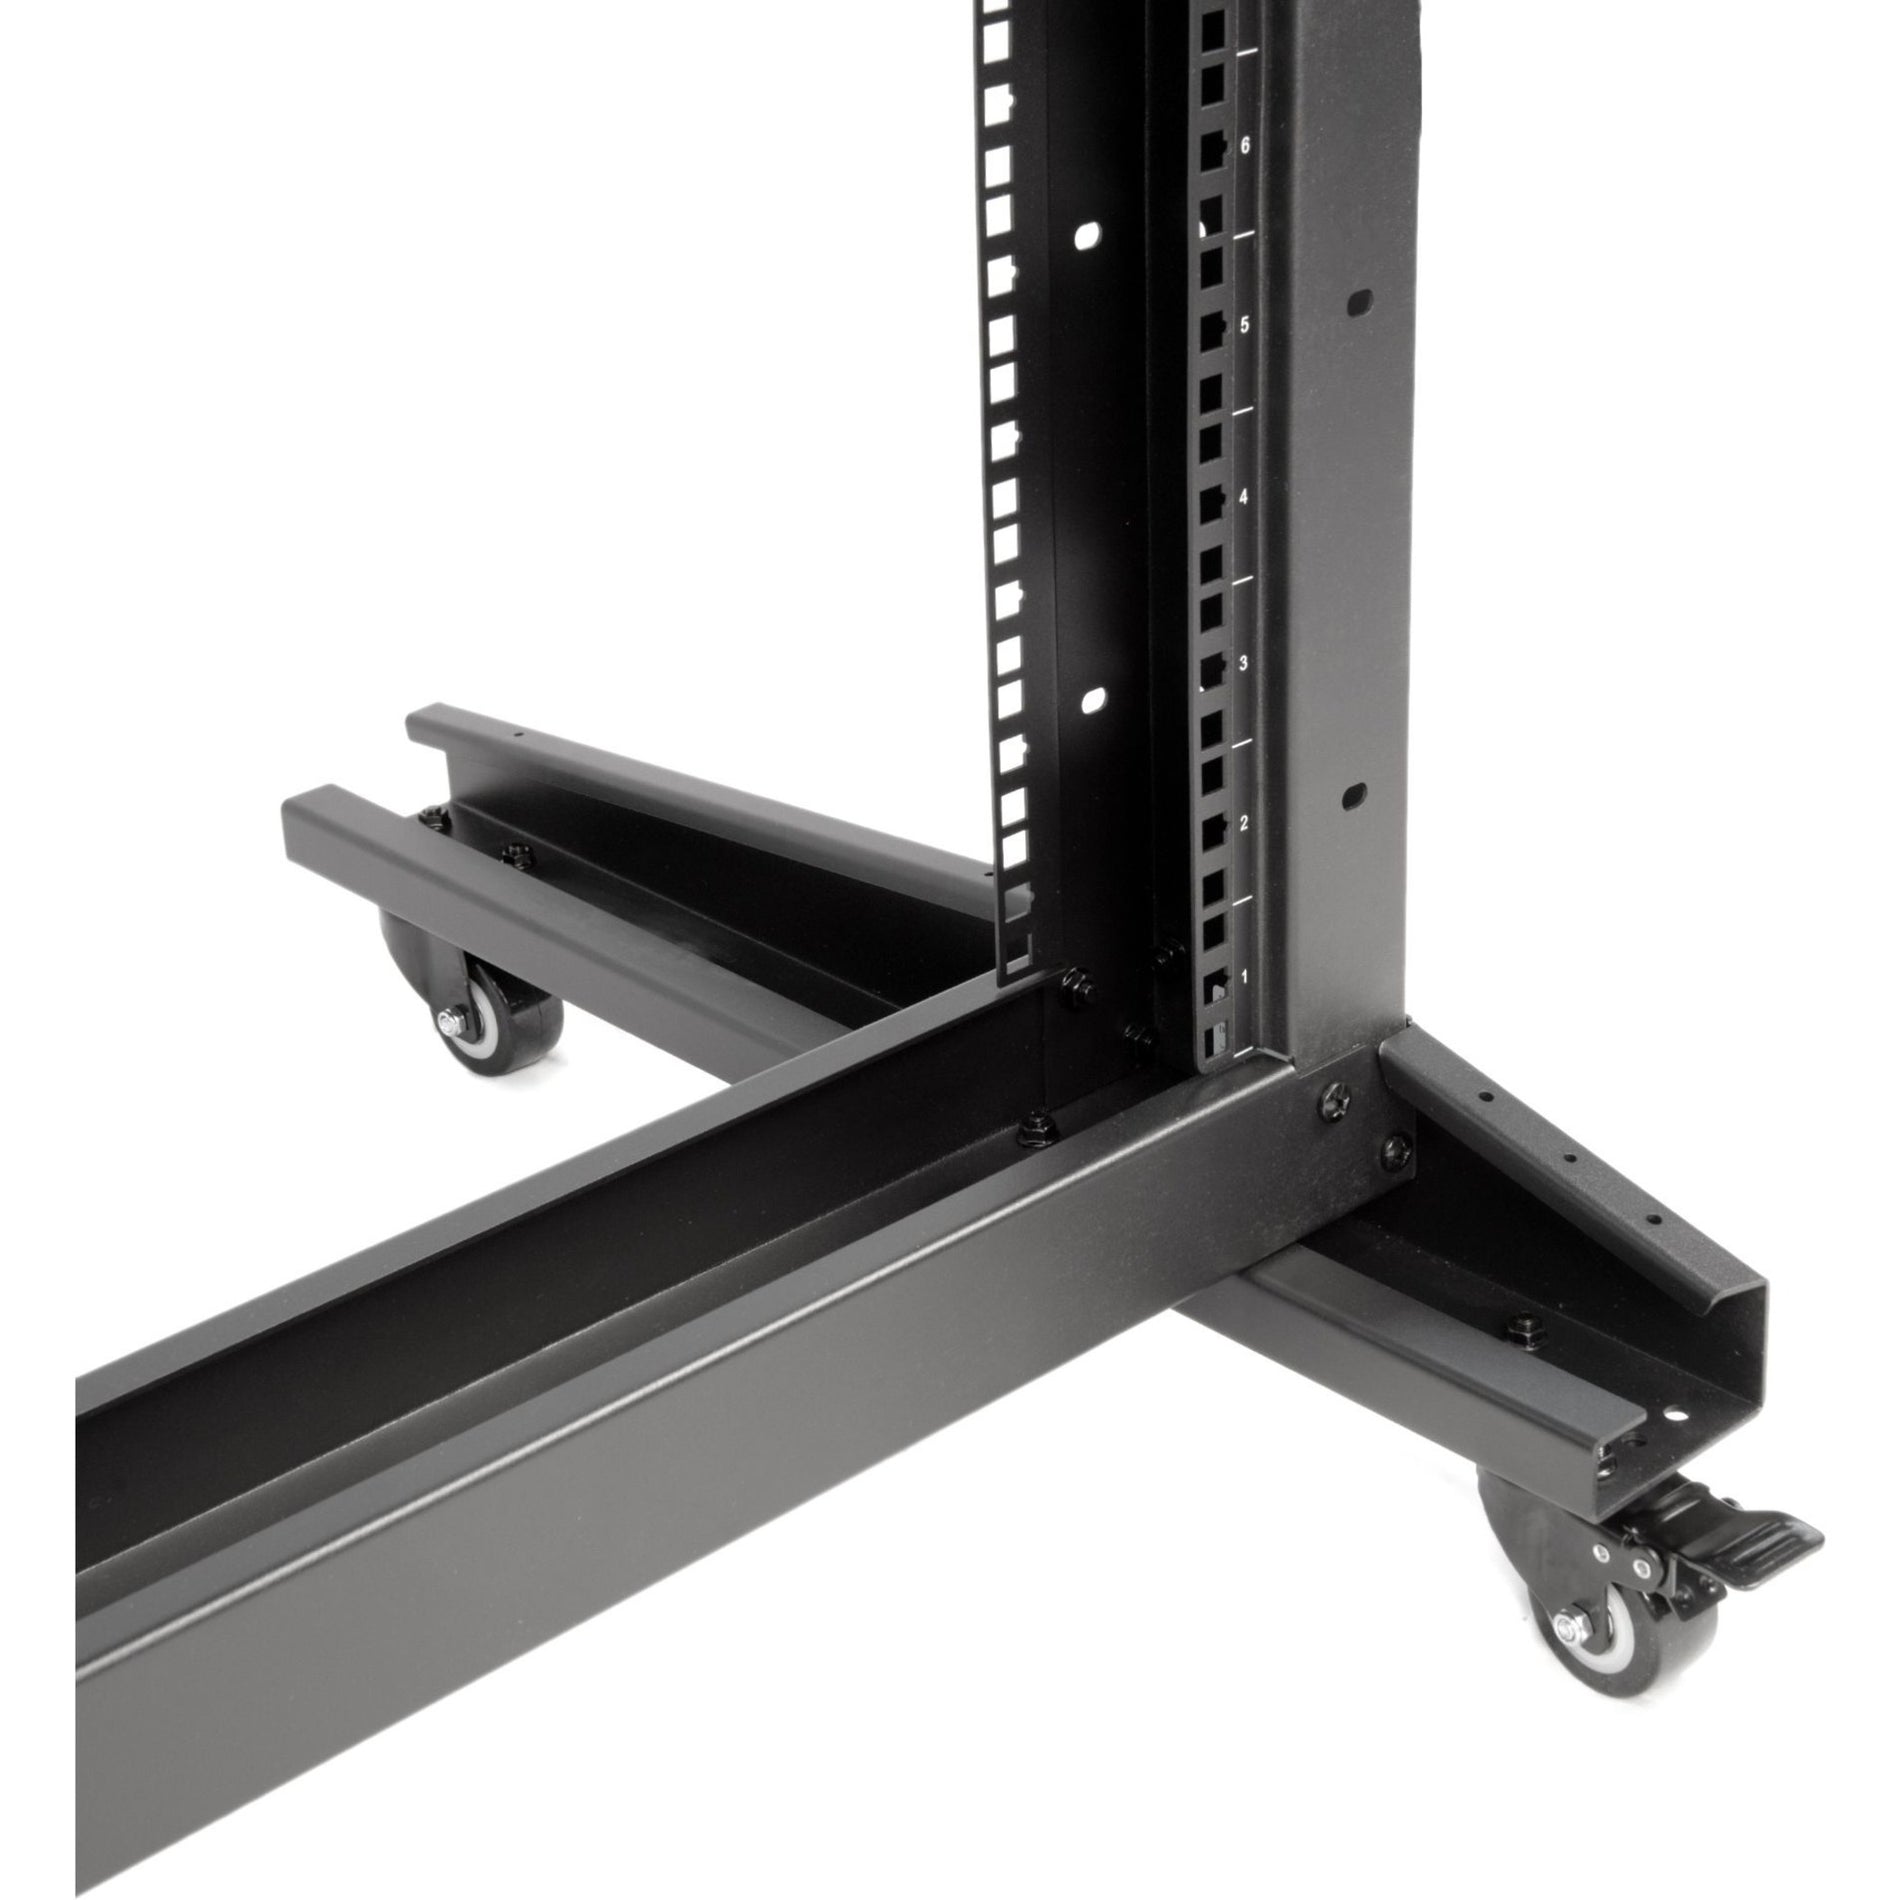 Rocstor Y10E030-B1 SolidRack 2-Post Server Rack With Casters - 42U, Heavy Duty, Open Frame, Network Equipment, Switch, Server, Patch Panel, Router, KVM Switch, LAN Switch